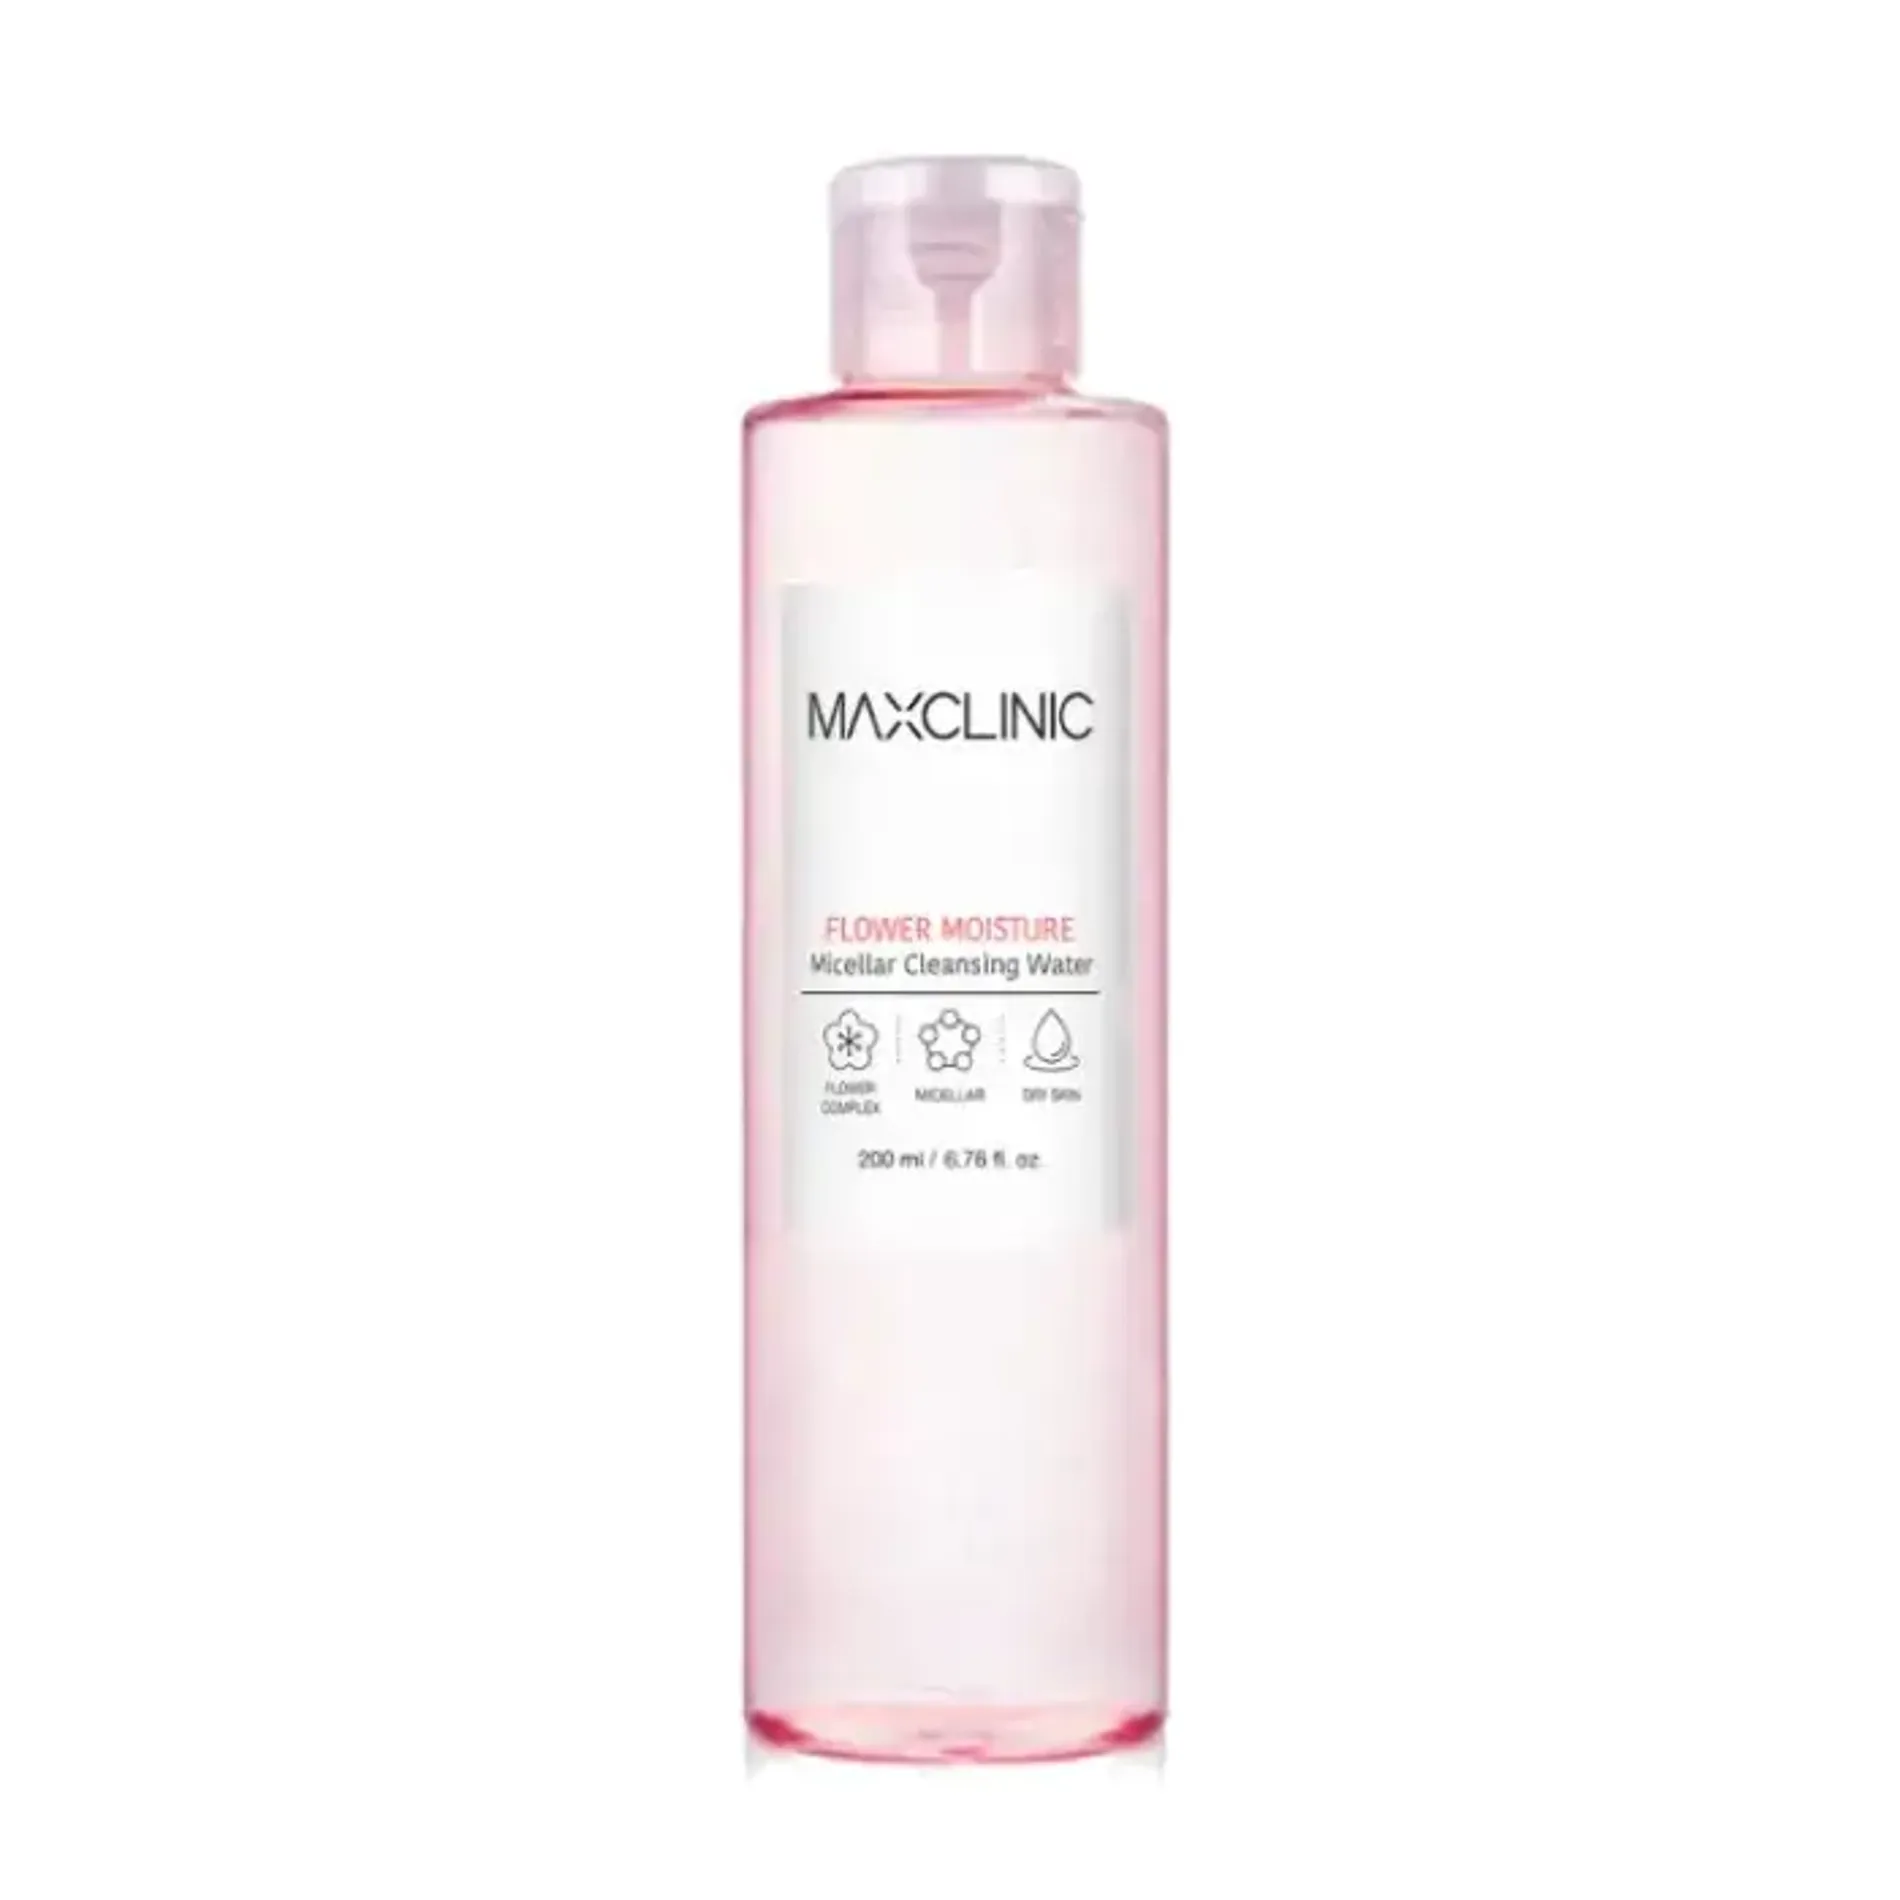 nuoc-tay-trang-maxclinic-micellar-cleansing-water-flower-moisture-200ml-1